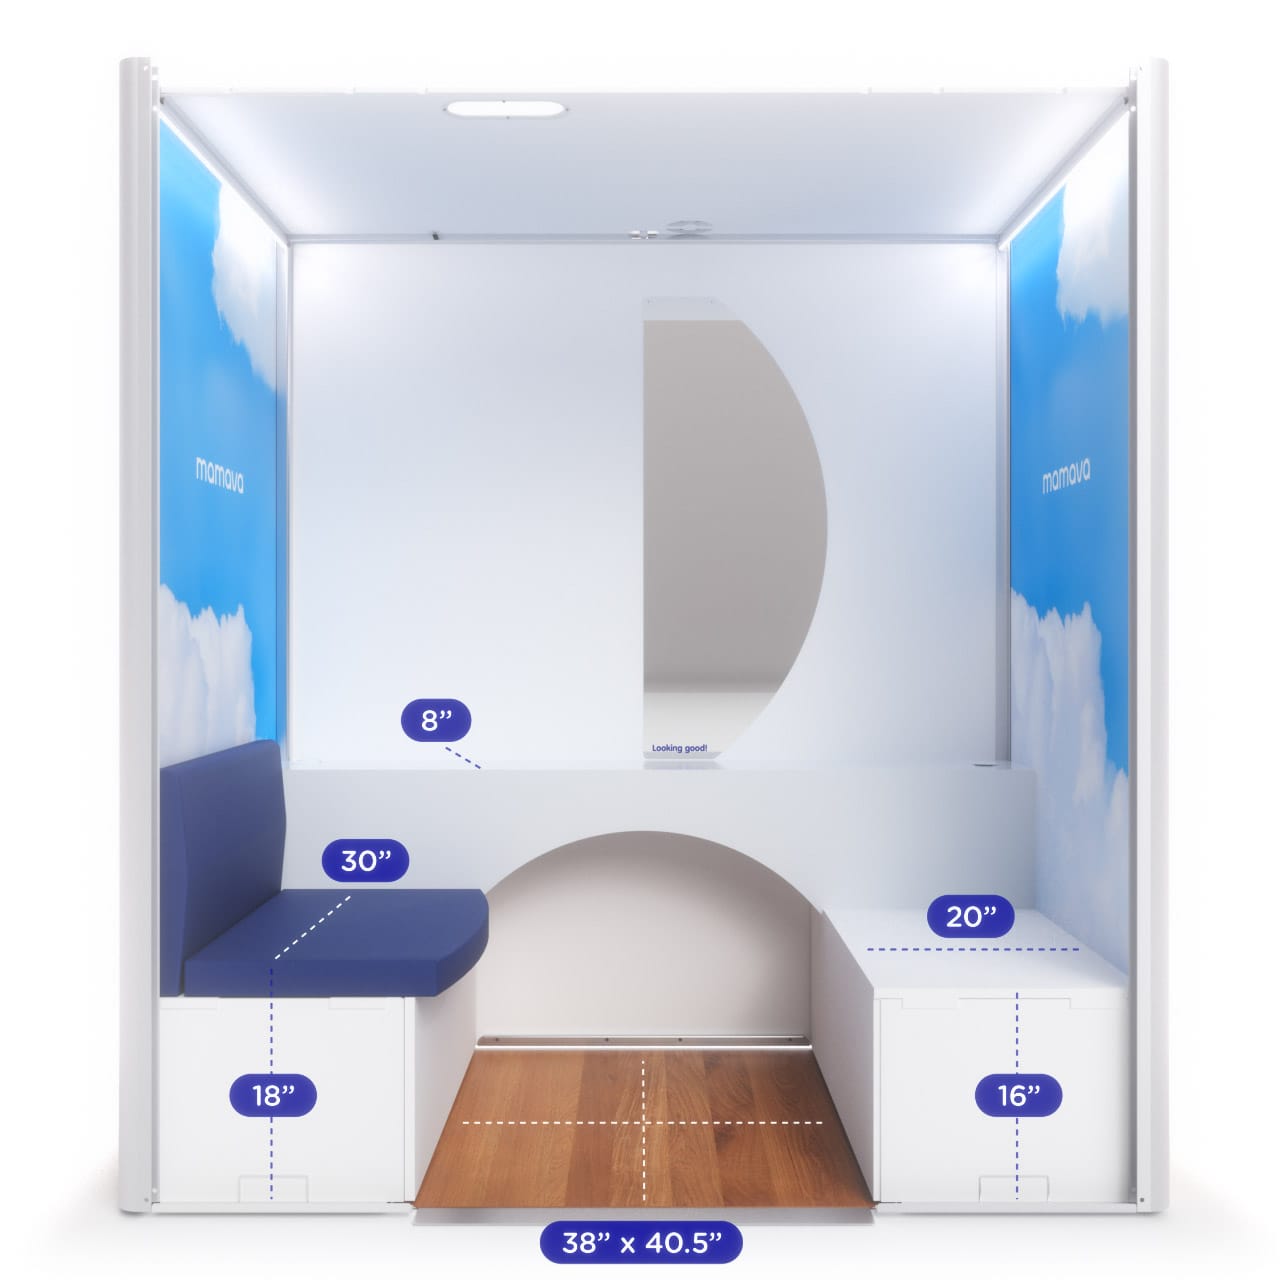 Interior of a Mamava lactation pod showing a built-in bench with blue upholstery, detailed with dimensions: seat height 18 inches, width 30 inches, depth 20 inches; counter depth 8 inches; and a footrest area measuring 38 by 40.5 inches.